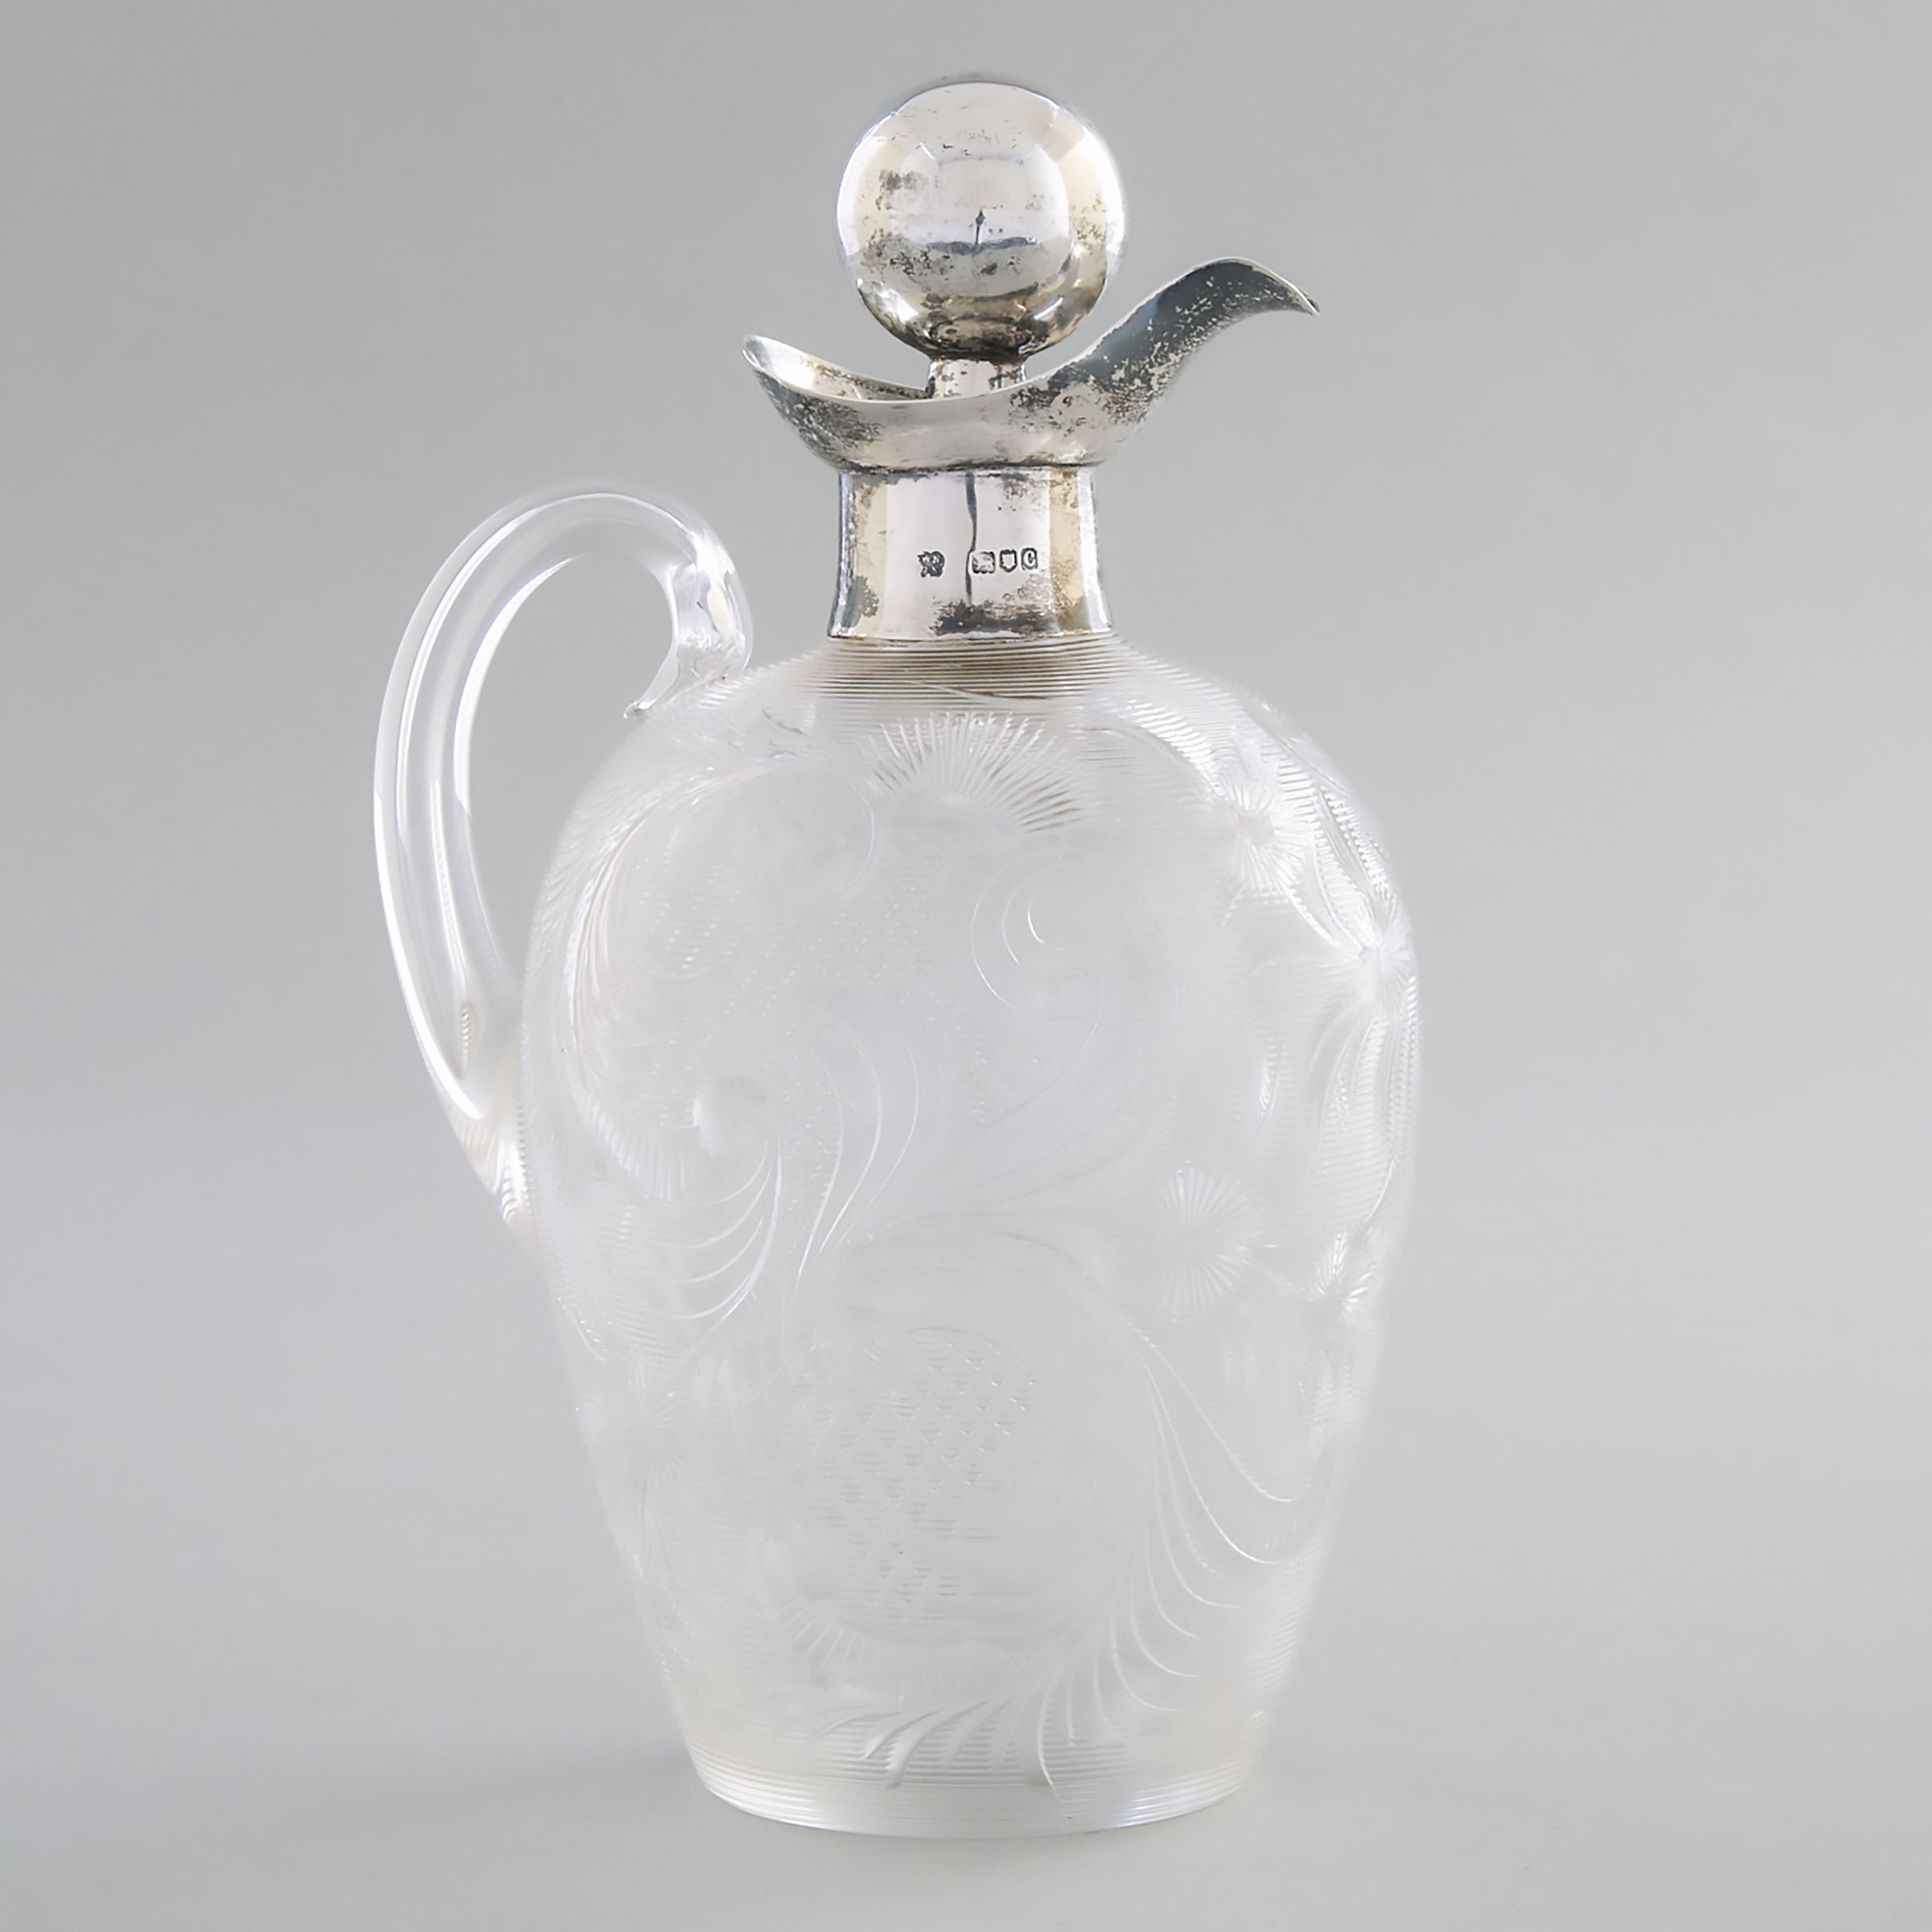 Late Victorian Silver Mounted Cut Glass Carafe, W. & G. Neal, London, 1898